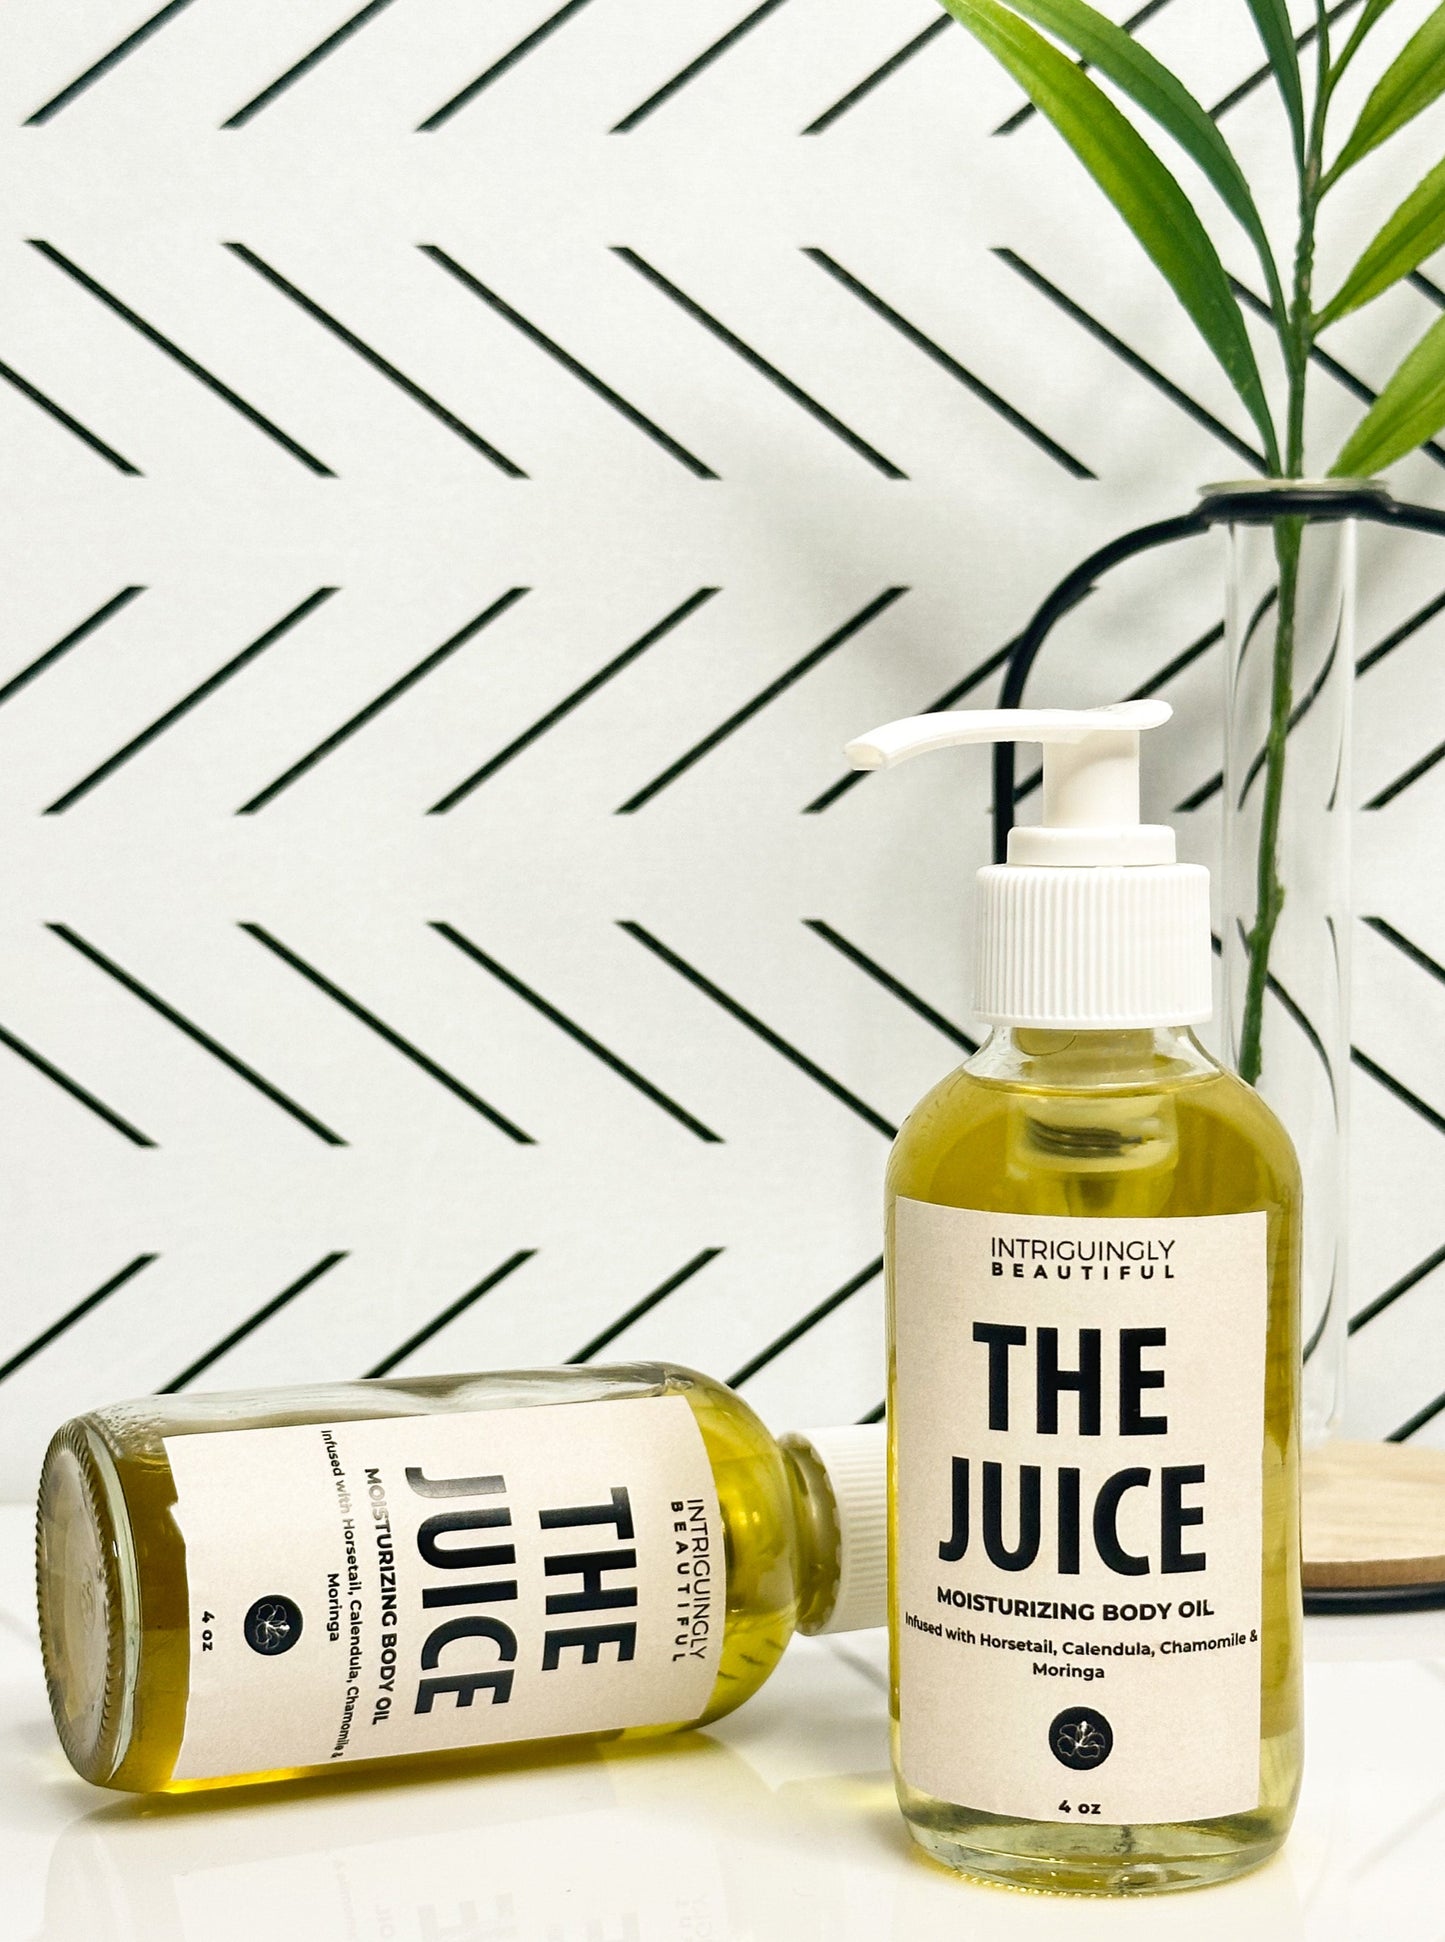 Treat yourself to luxury with our Body Juice Oil, makes your skin smoo, body  juice oil